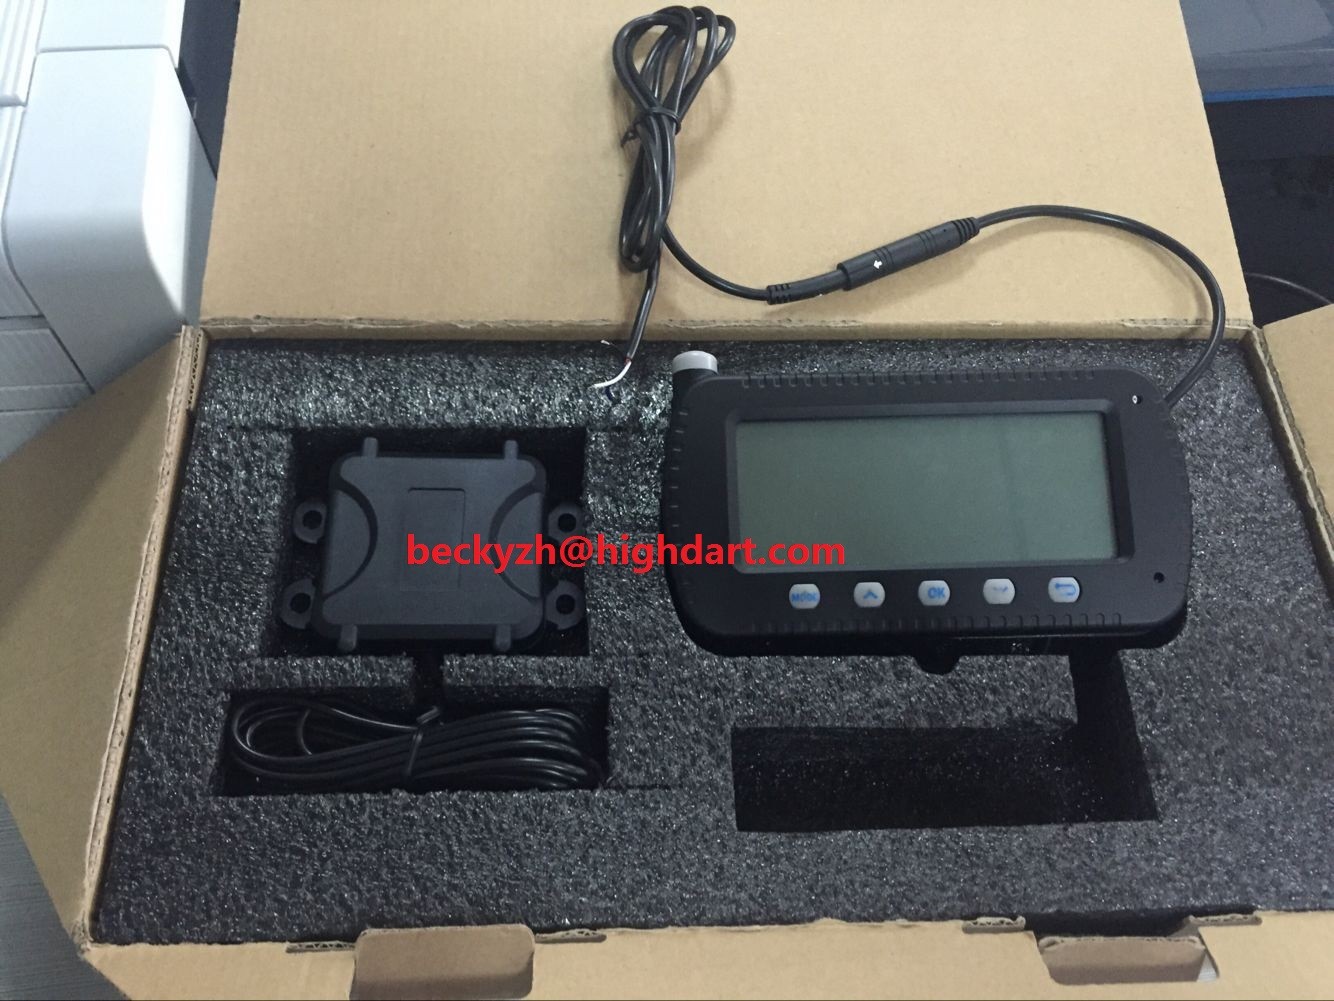 Truck TPMS tire pressure monitoring system With Strap-on Sensors RS232 DB9